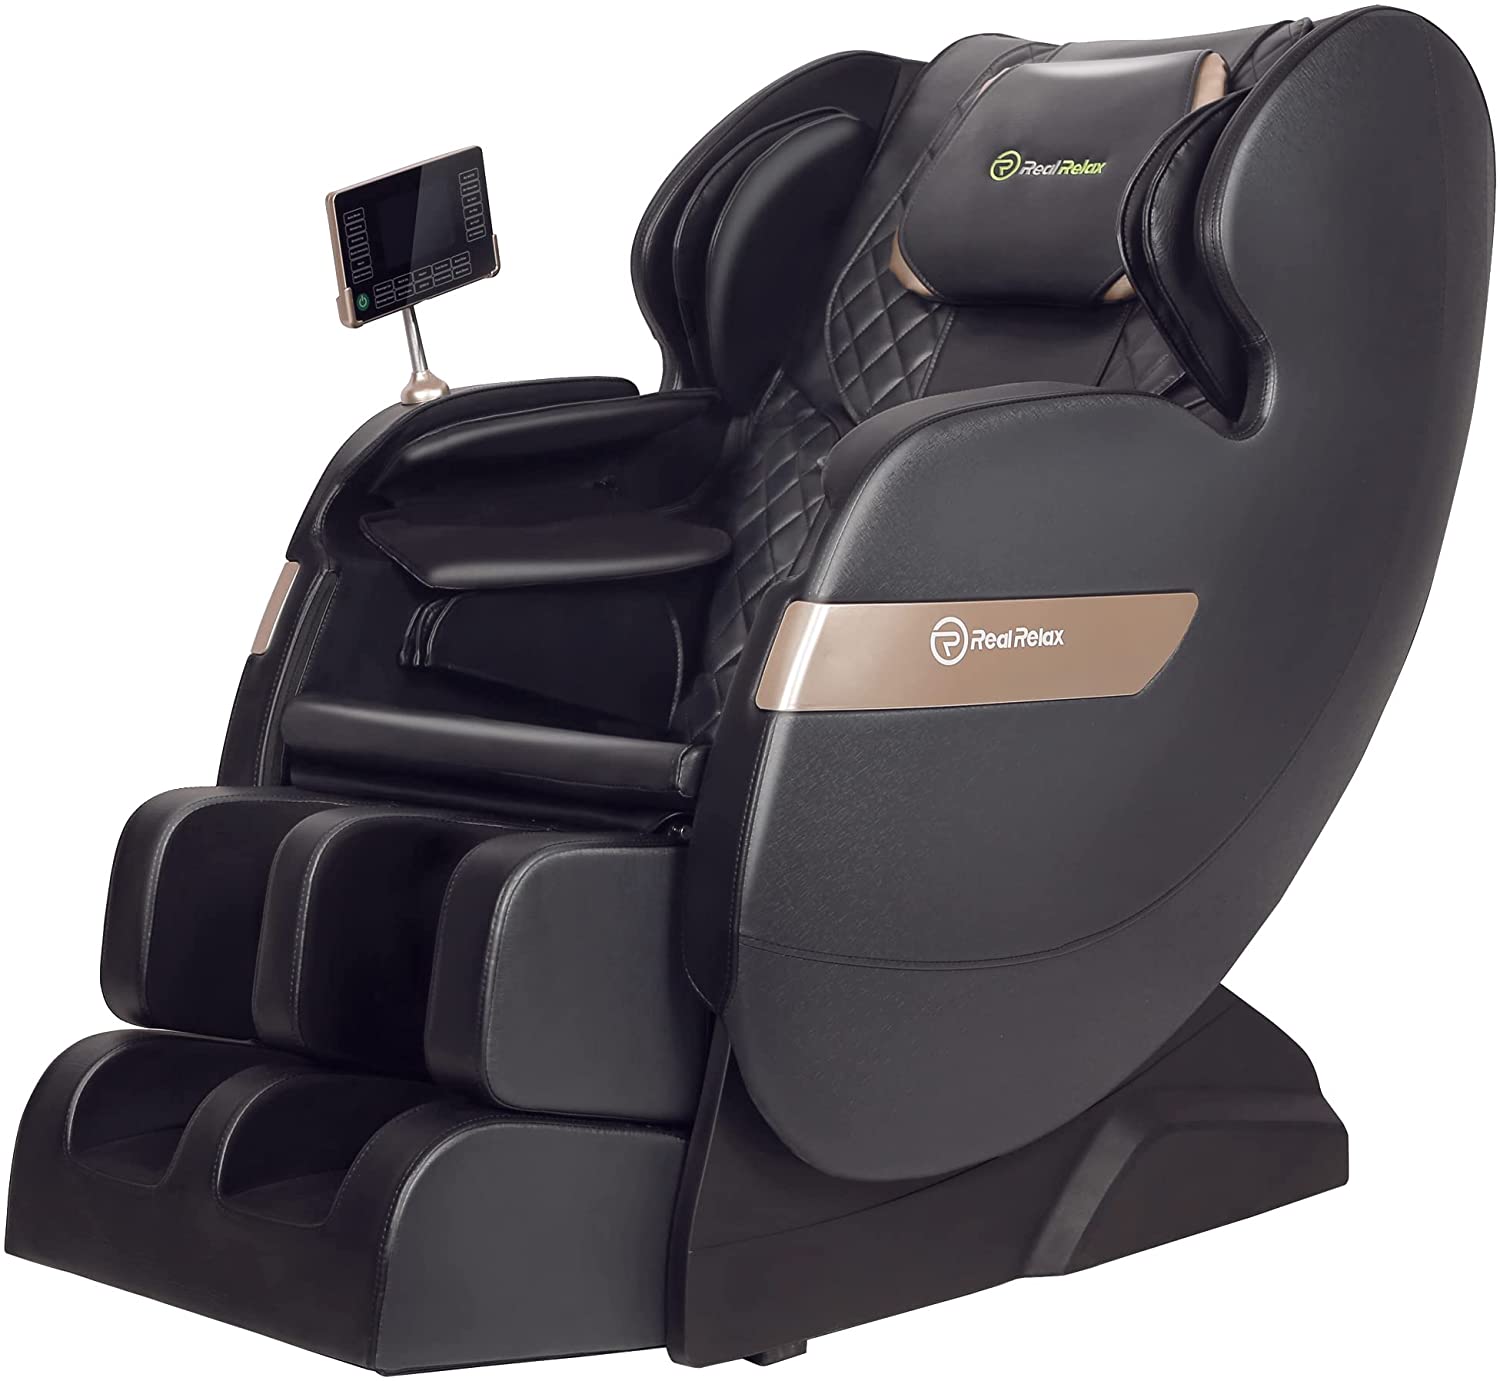 Real Relax 2022 Massage Chair of Dual-core S Track Recliner